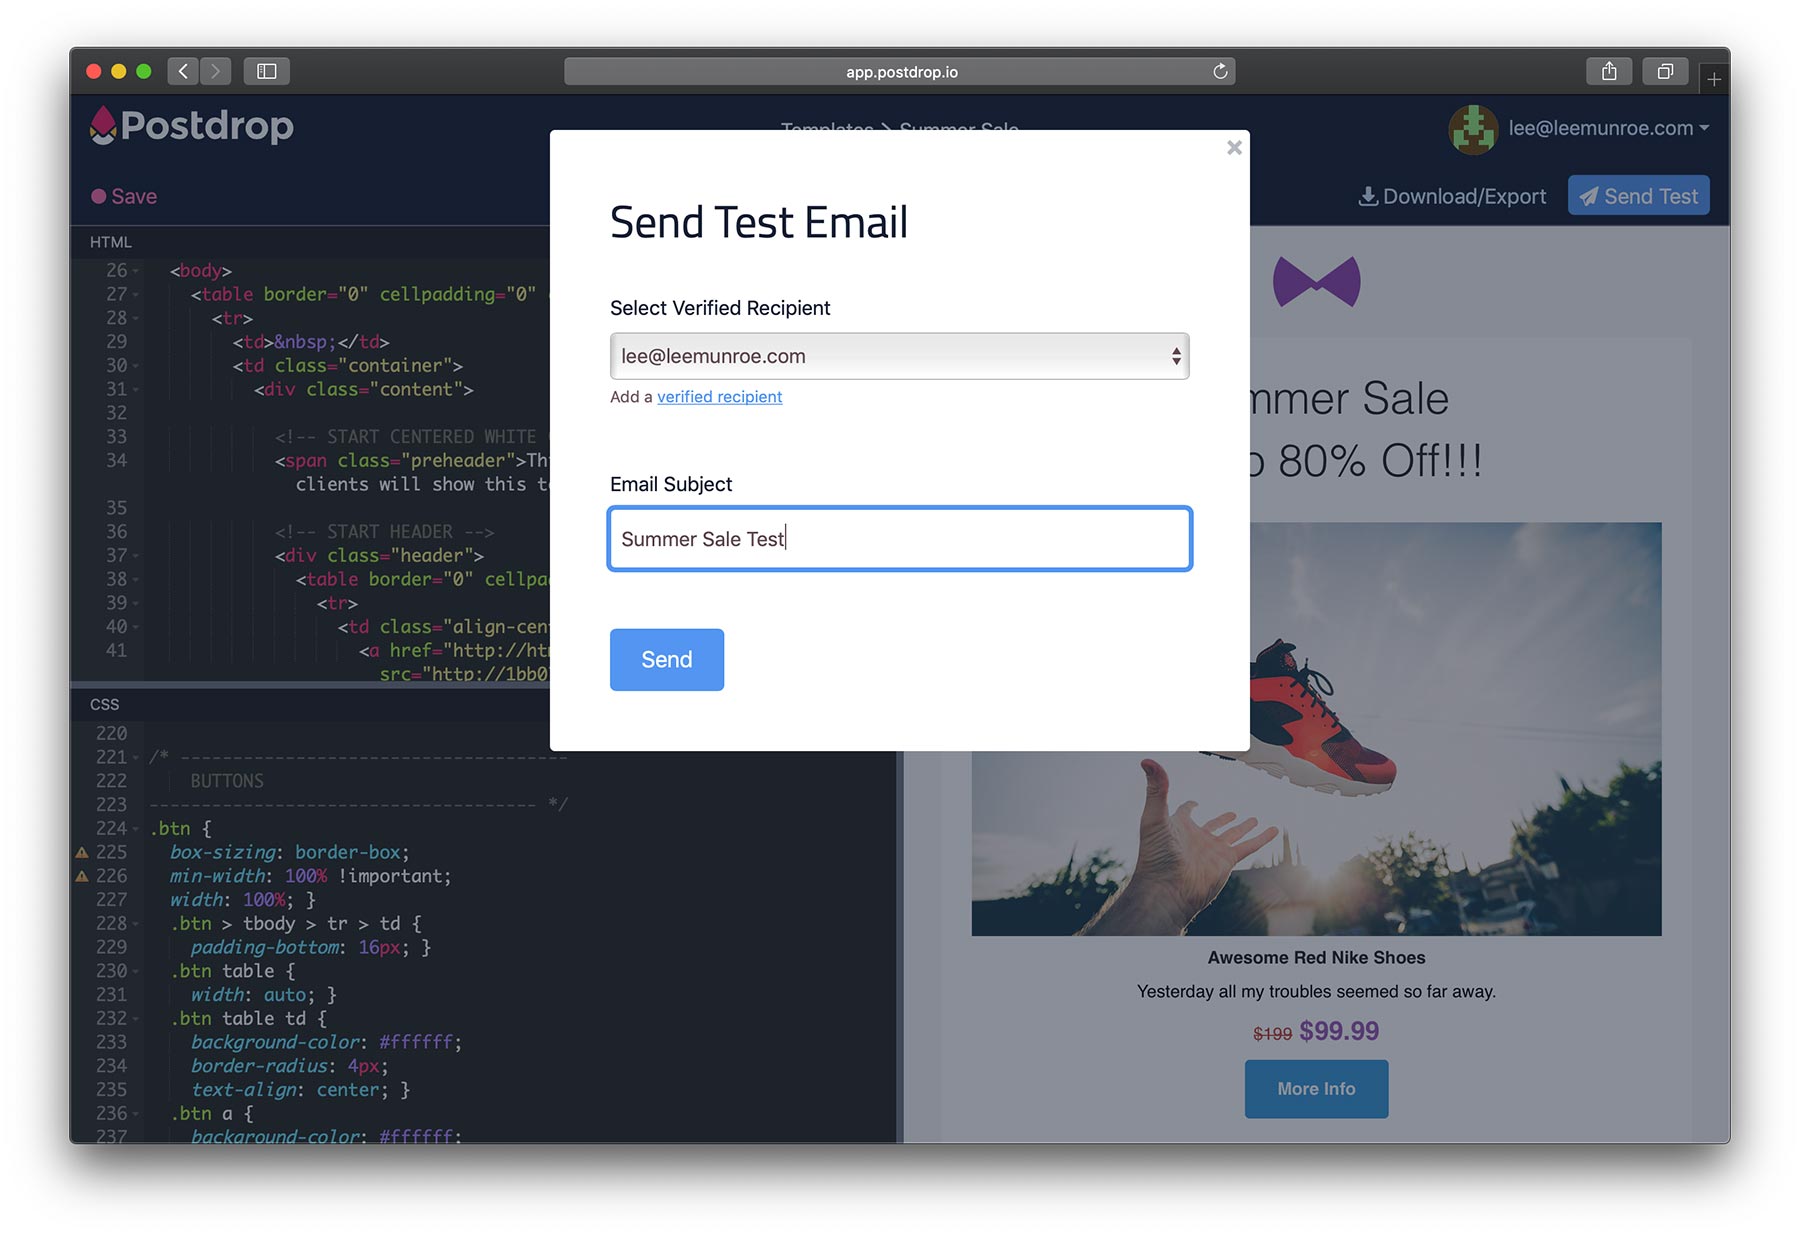 Send test emails with our editor